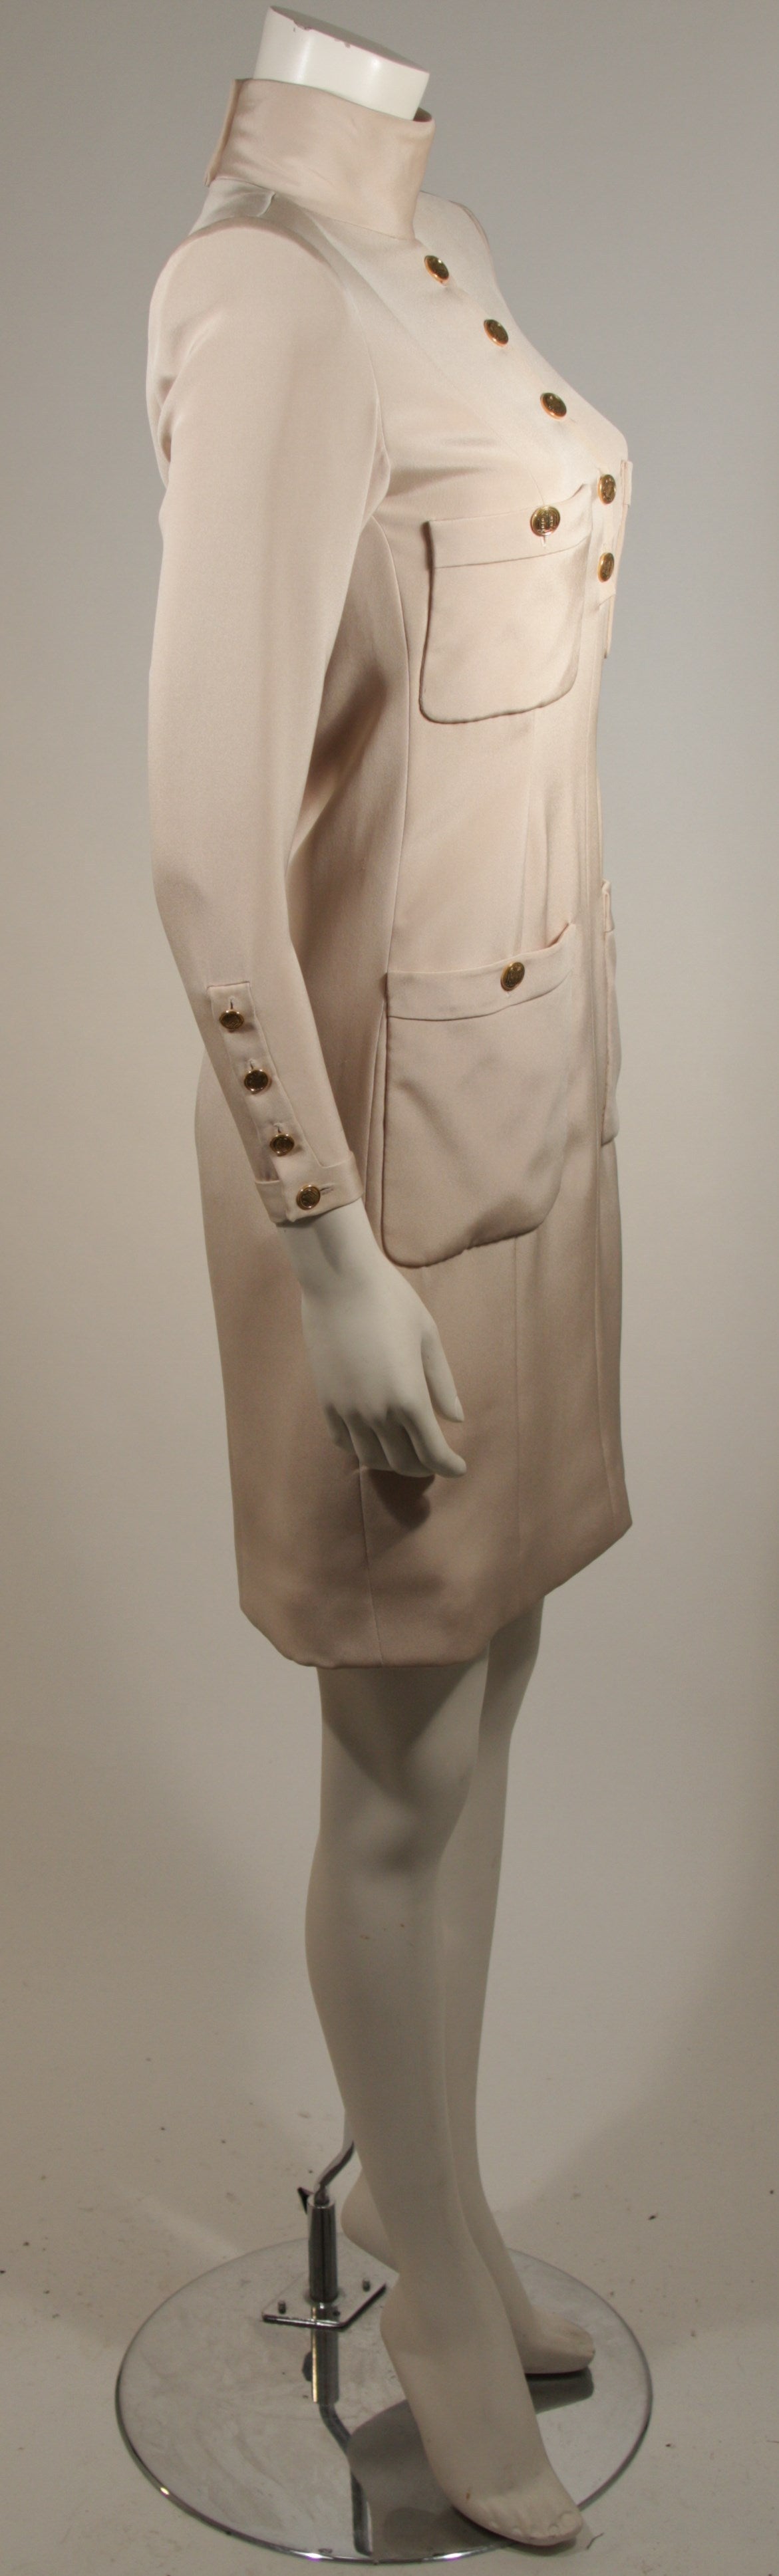 1980's Chanel Haute Couture Champagne Silk Military Inspired Dress Size 2-4 2